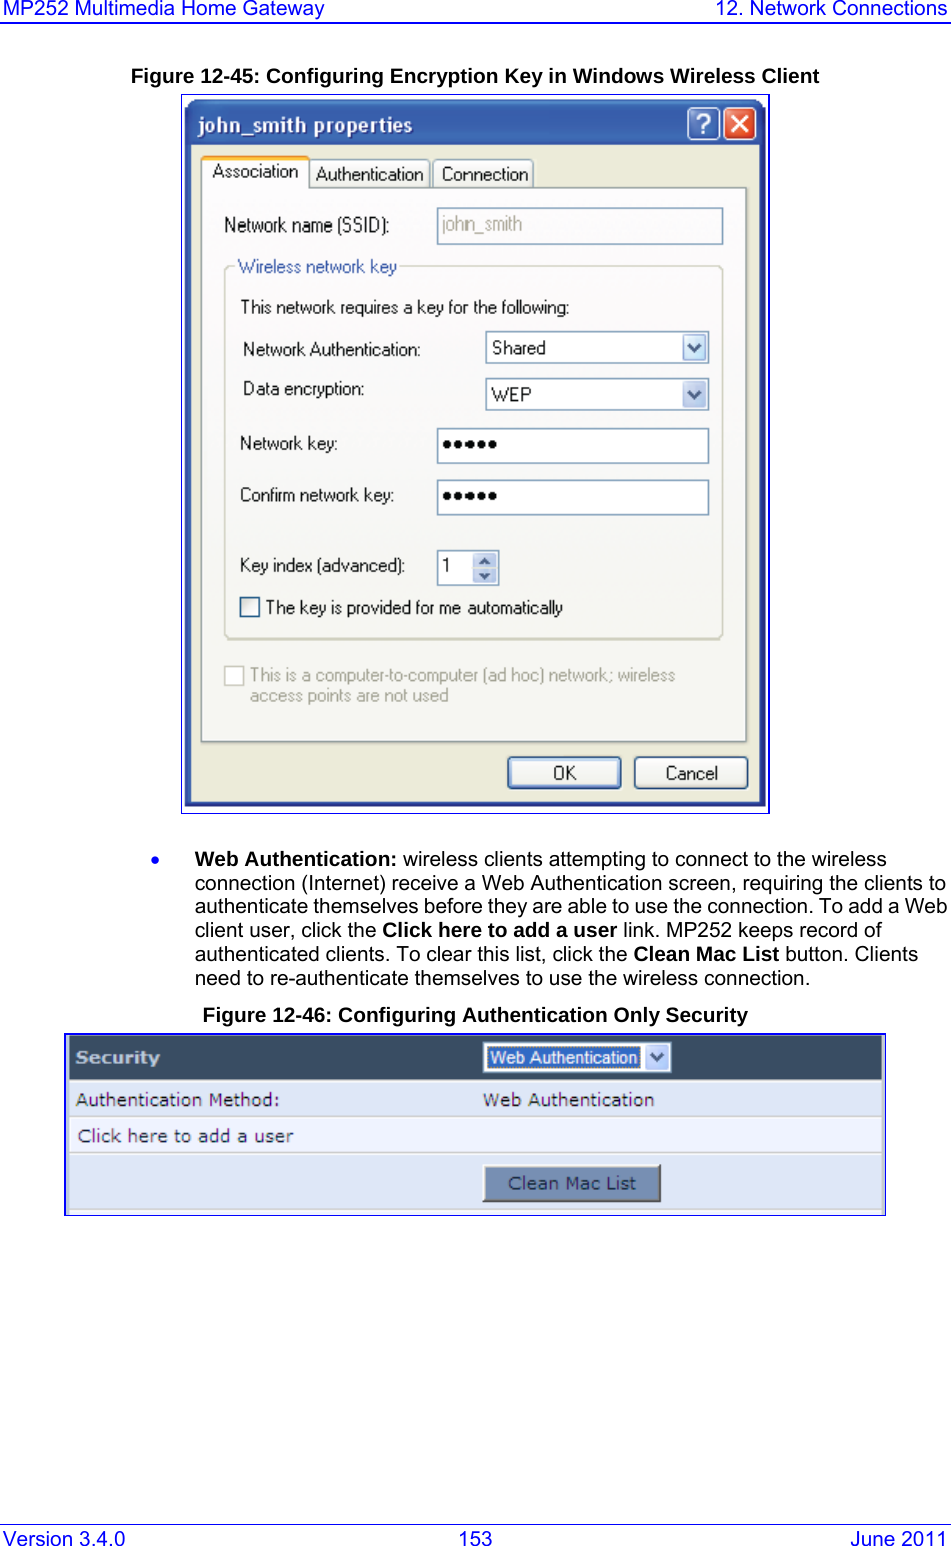 MP252 Multimedia Home Gateway  12. Network Connections Version 3.4.0  153  June 2011 Figure 12-45: Configuring Encryption Key in Windows Wireless Client  • Web Authentication: wireless clients attempting to connect to the wireless connection (Internet) receive a Web Authentication screen, requiring the clients to authenticate themselves before they are able to use the connection. To add a Web client user, click the Click here to add a user link. MP252 keeps record of authenticated clients. To clear this list, click the Clean Mac List button. Clients need to re-authenticate themselves to use the wireless connection. Figure 12-46: Configuring Authentication Only Security   